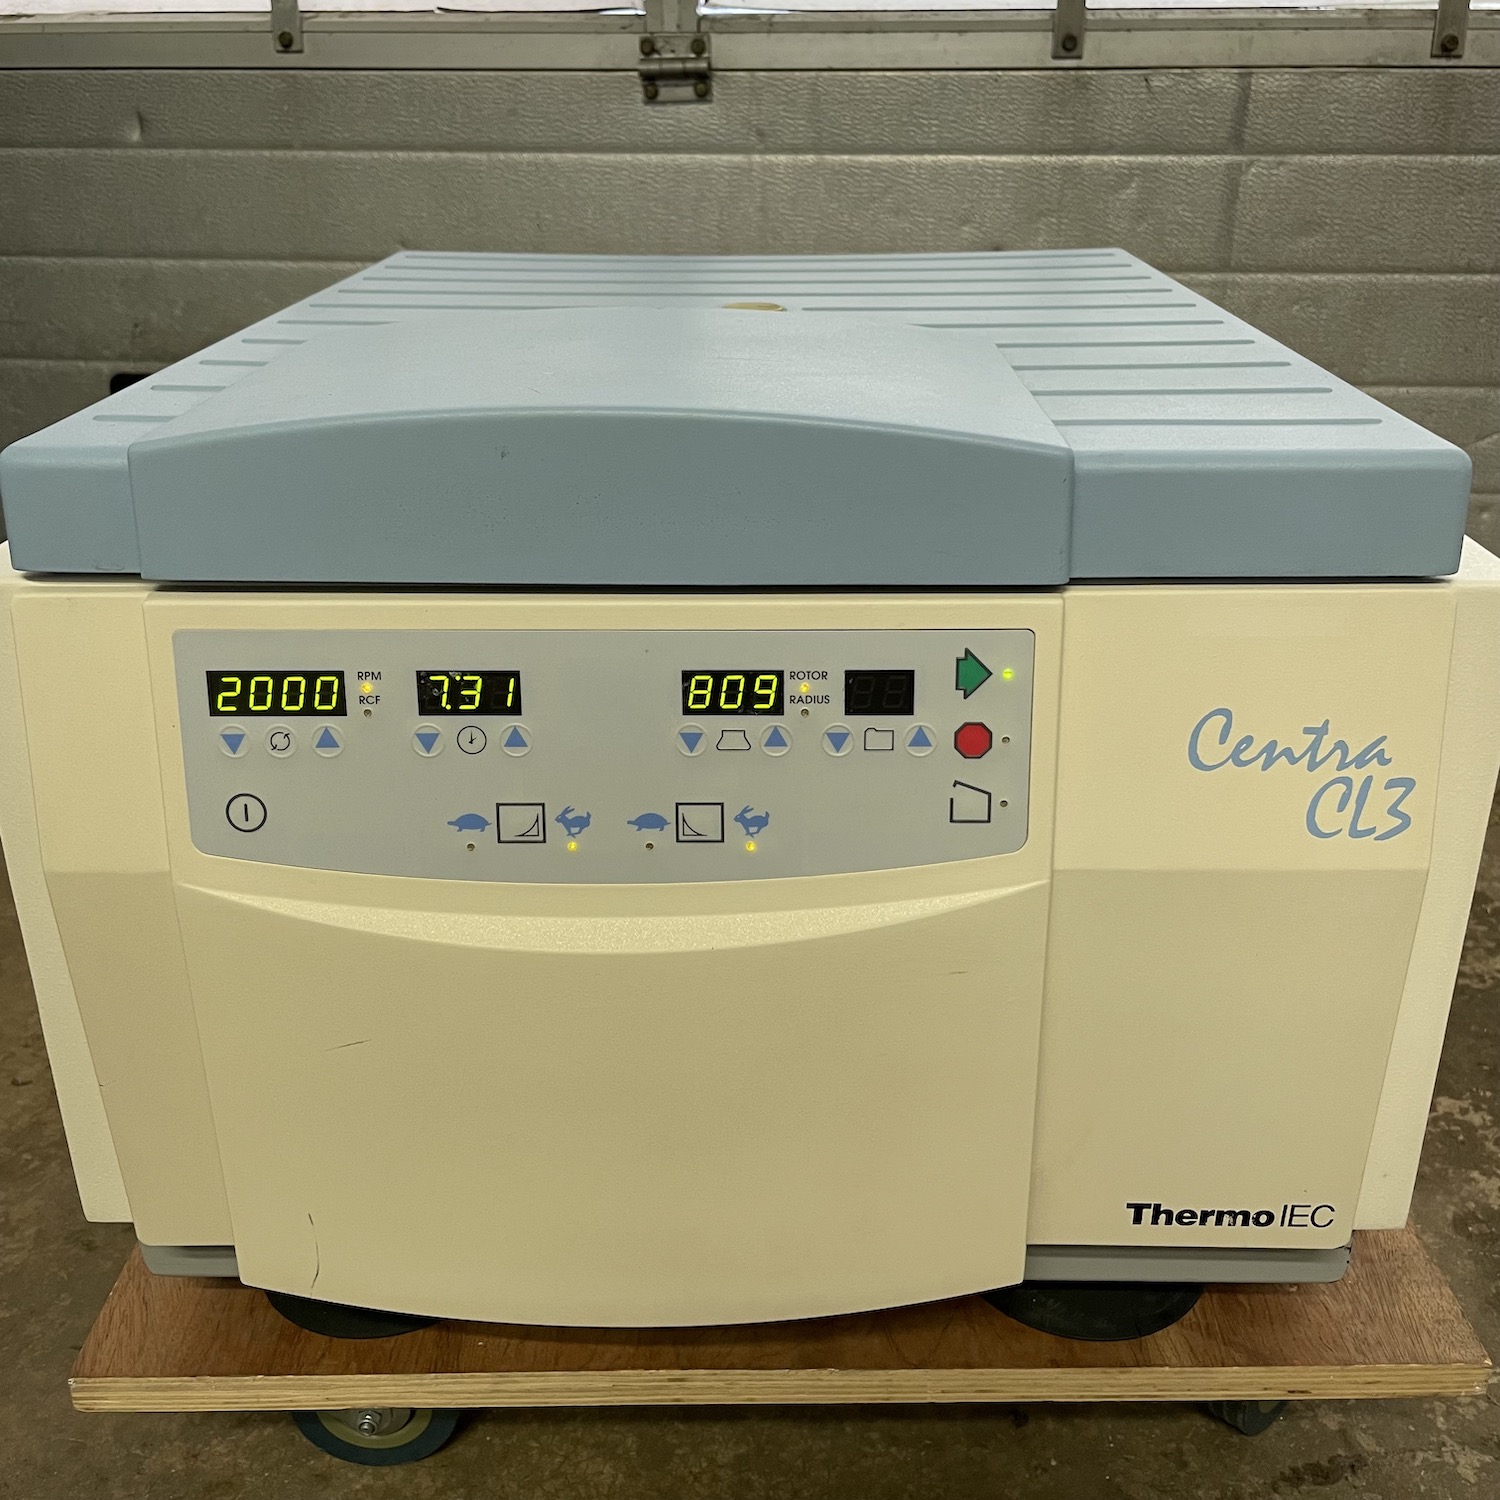 centrifuge | high speed | thermo iec | centra cl3